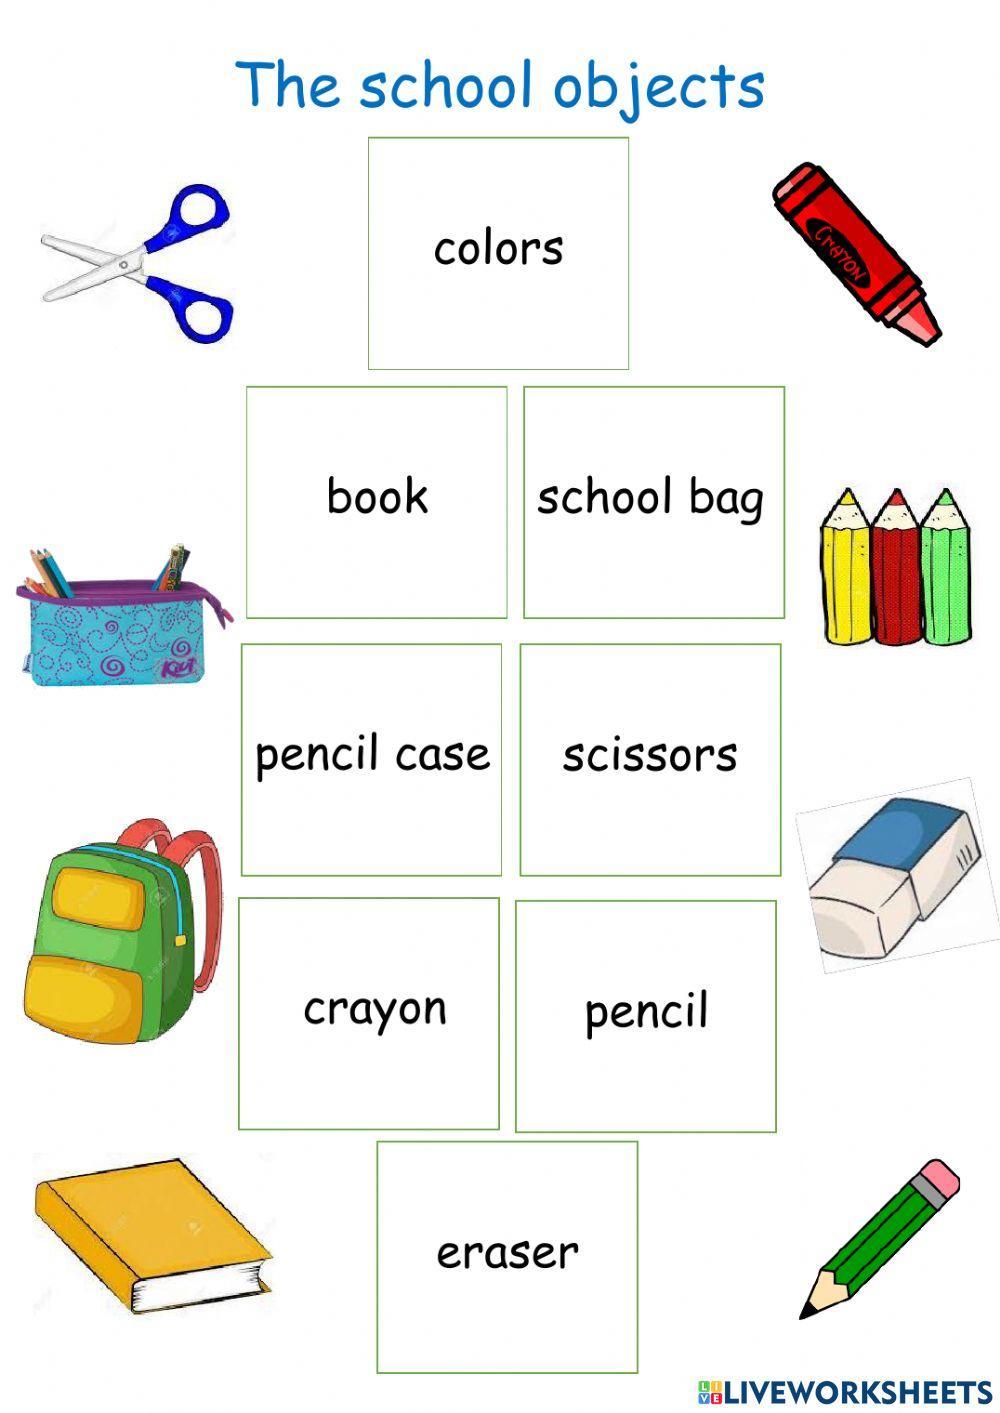 The school objects